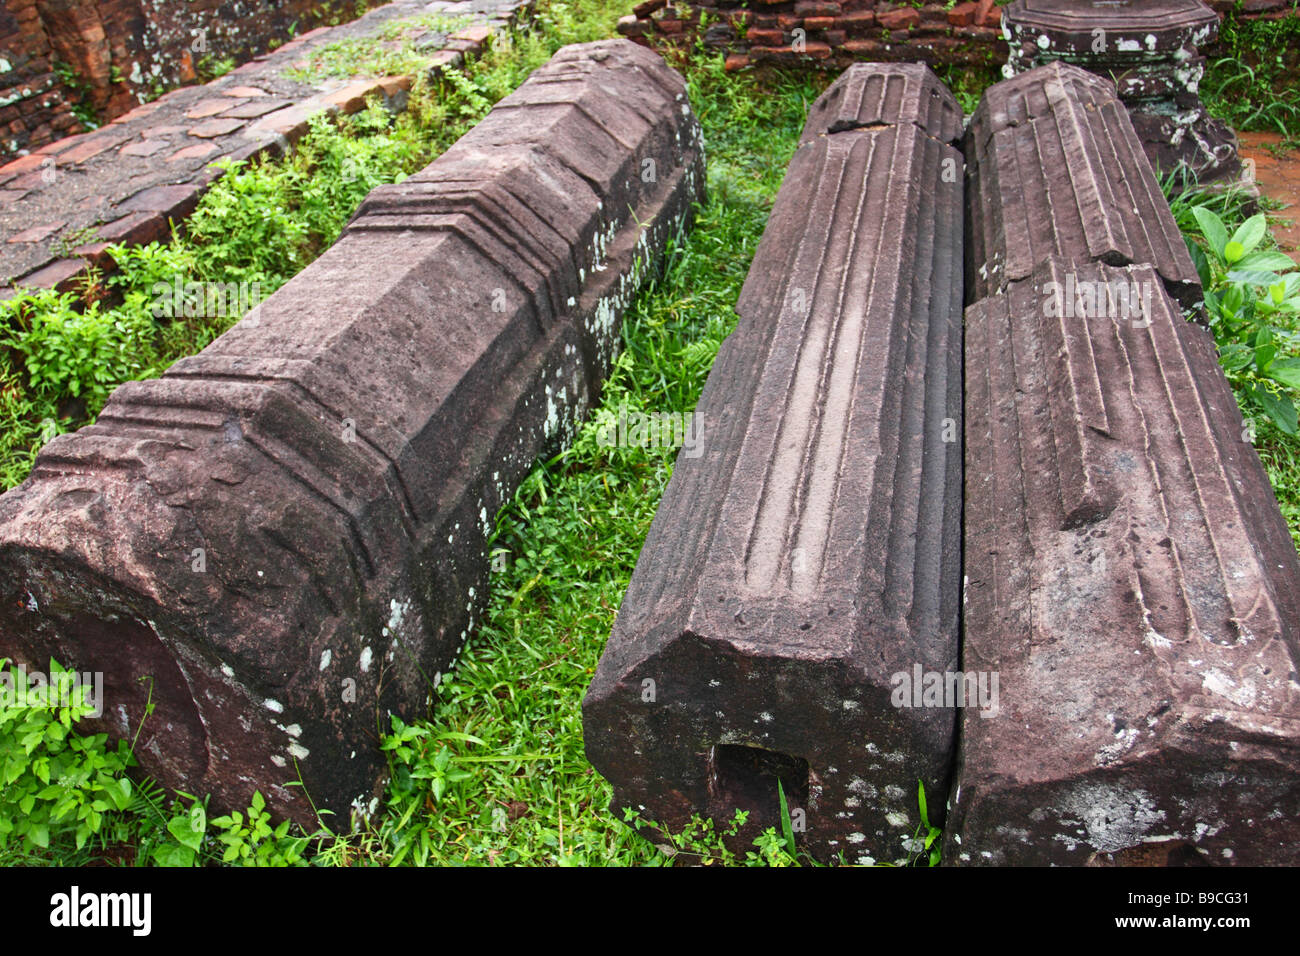 Ancient Ruins of temples at My Son, the capital of the Champa Kingdom near Hoi An. Vietnam Stock Photo